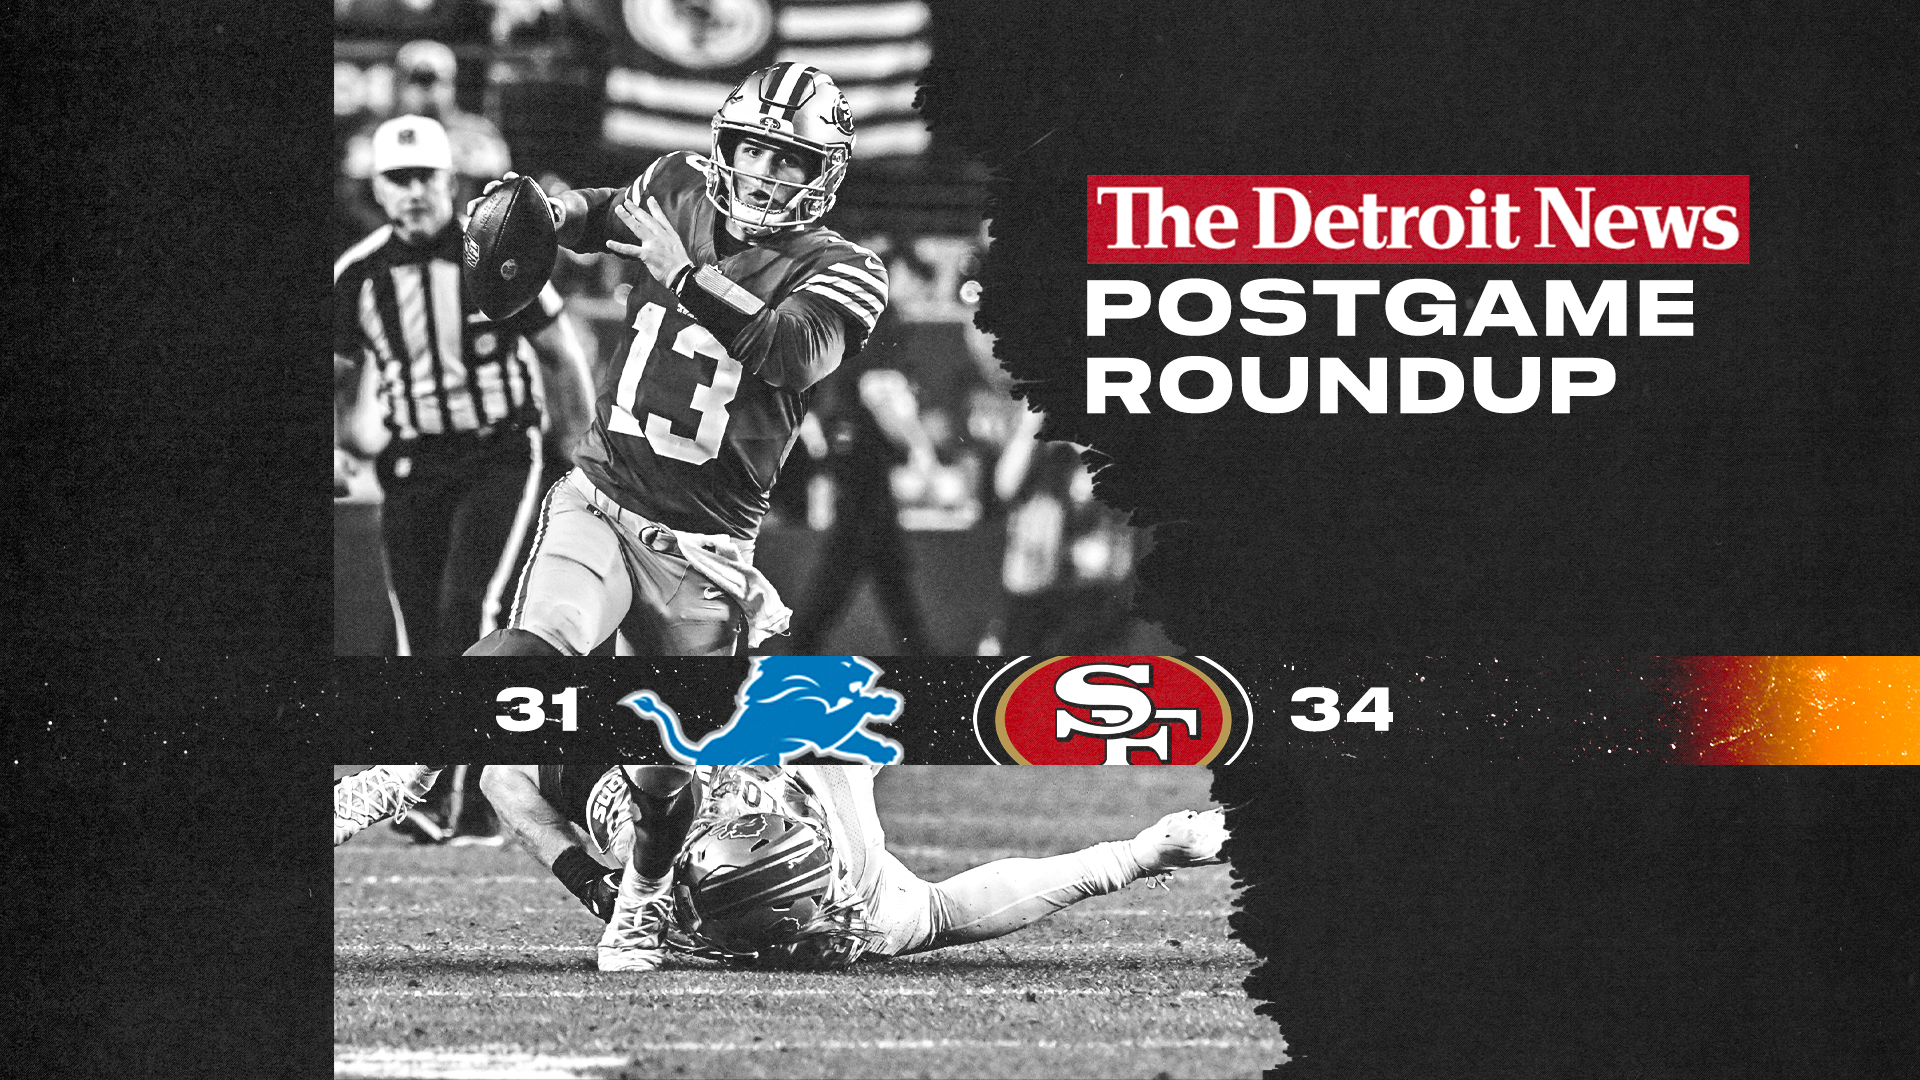 Here's a roundup from The Detroit News' coverage of the Detroit Lions' 34-31 NFC Championship loss to the San Francisco 49ers.